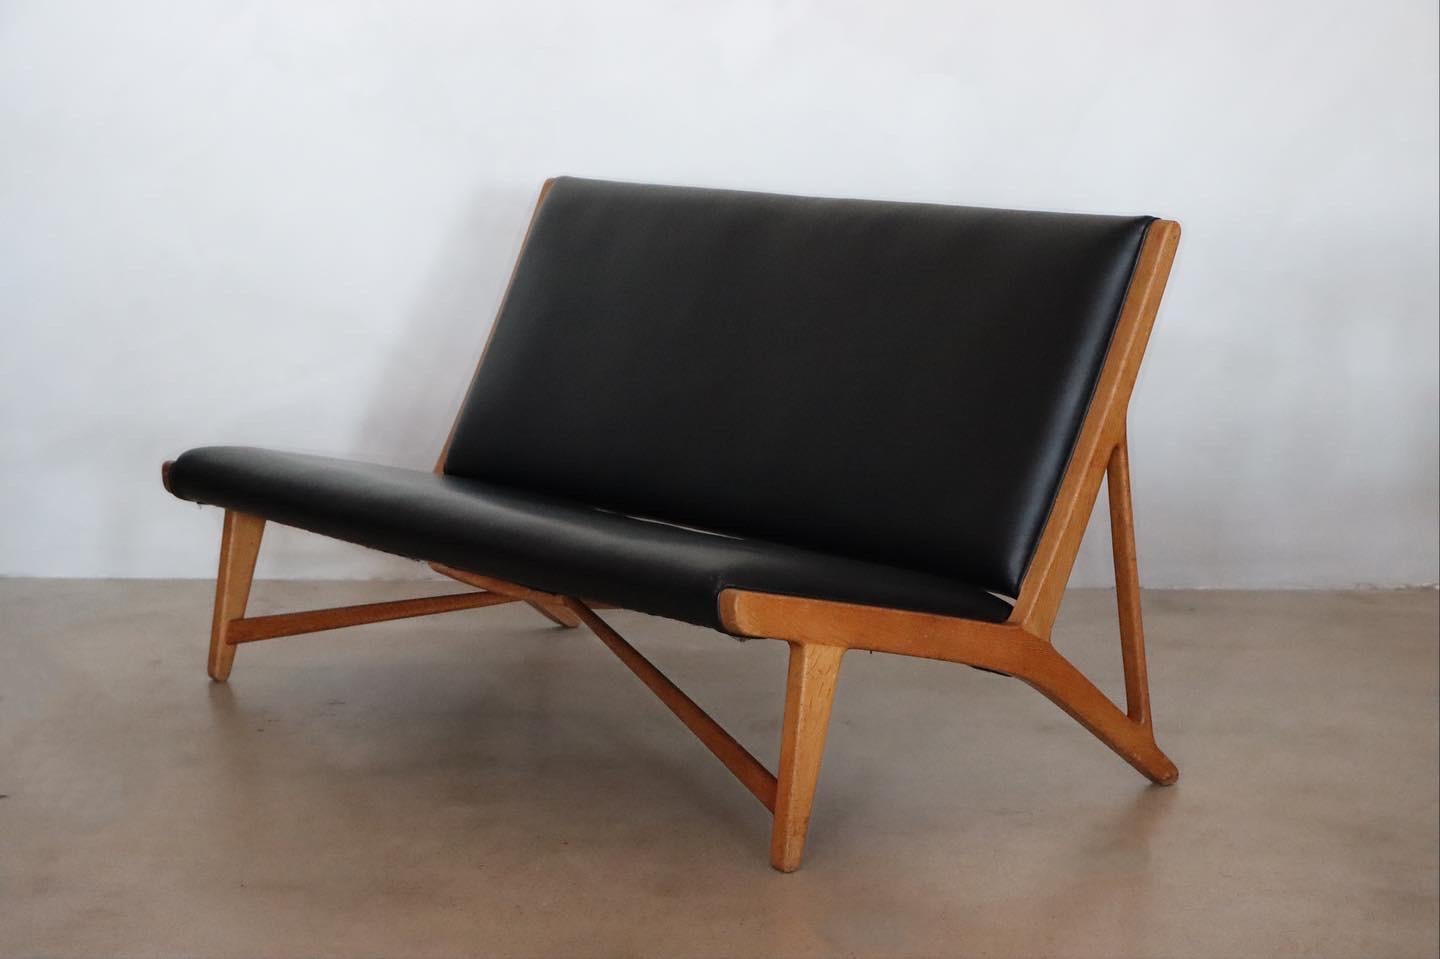 Rare and early “JH 555” armless sofa designed by Hans J. Wegner for Johannes Hansen, c. 1950s. Executed in oak and has been restored in soft black leather. These early examples were hand crafted in Johannes Hansens workshop and was produced in very